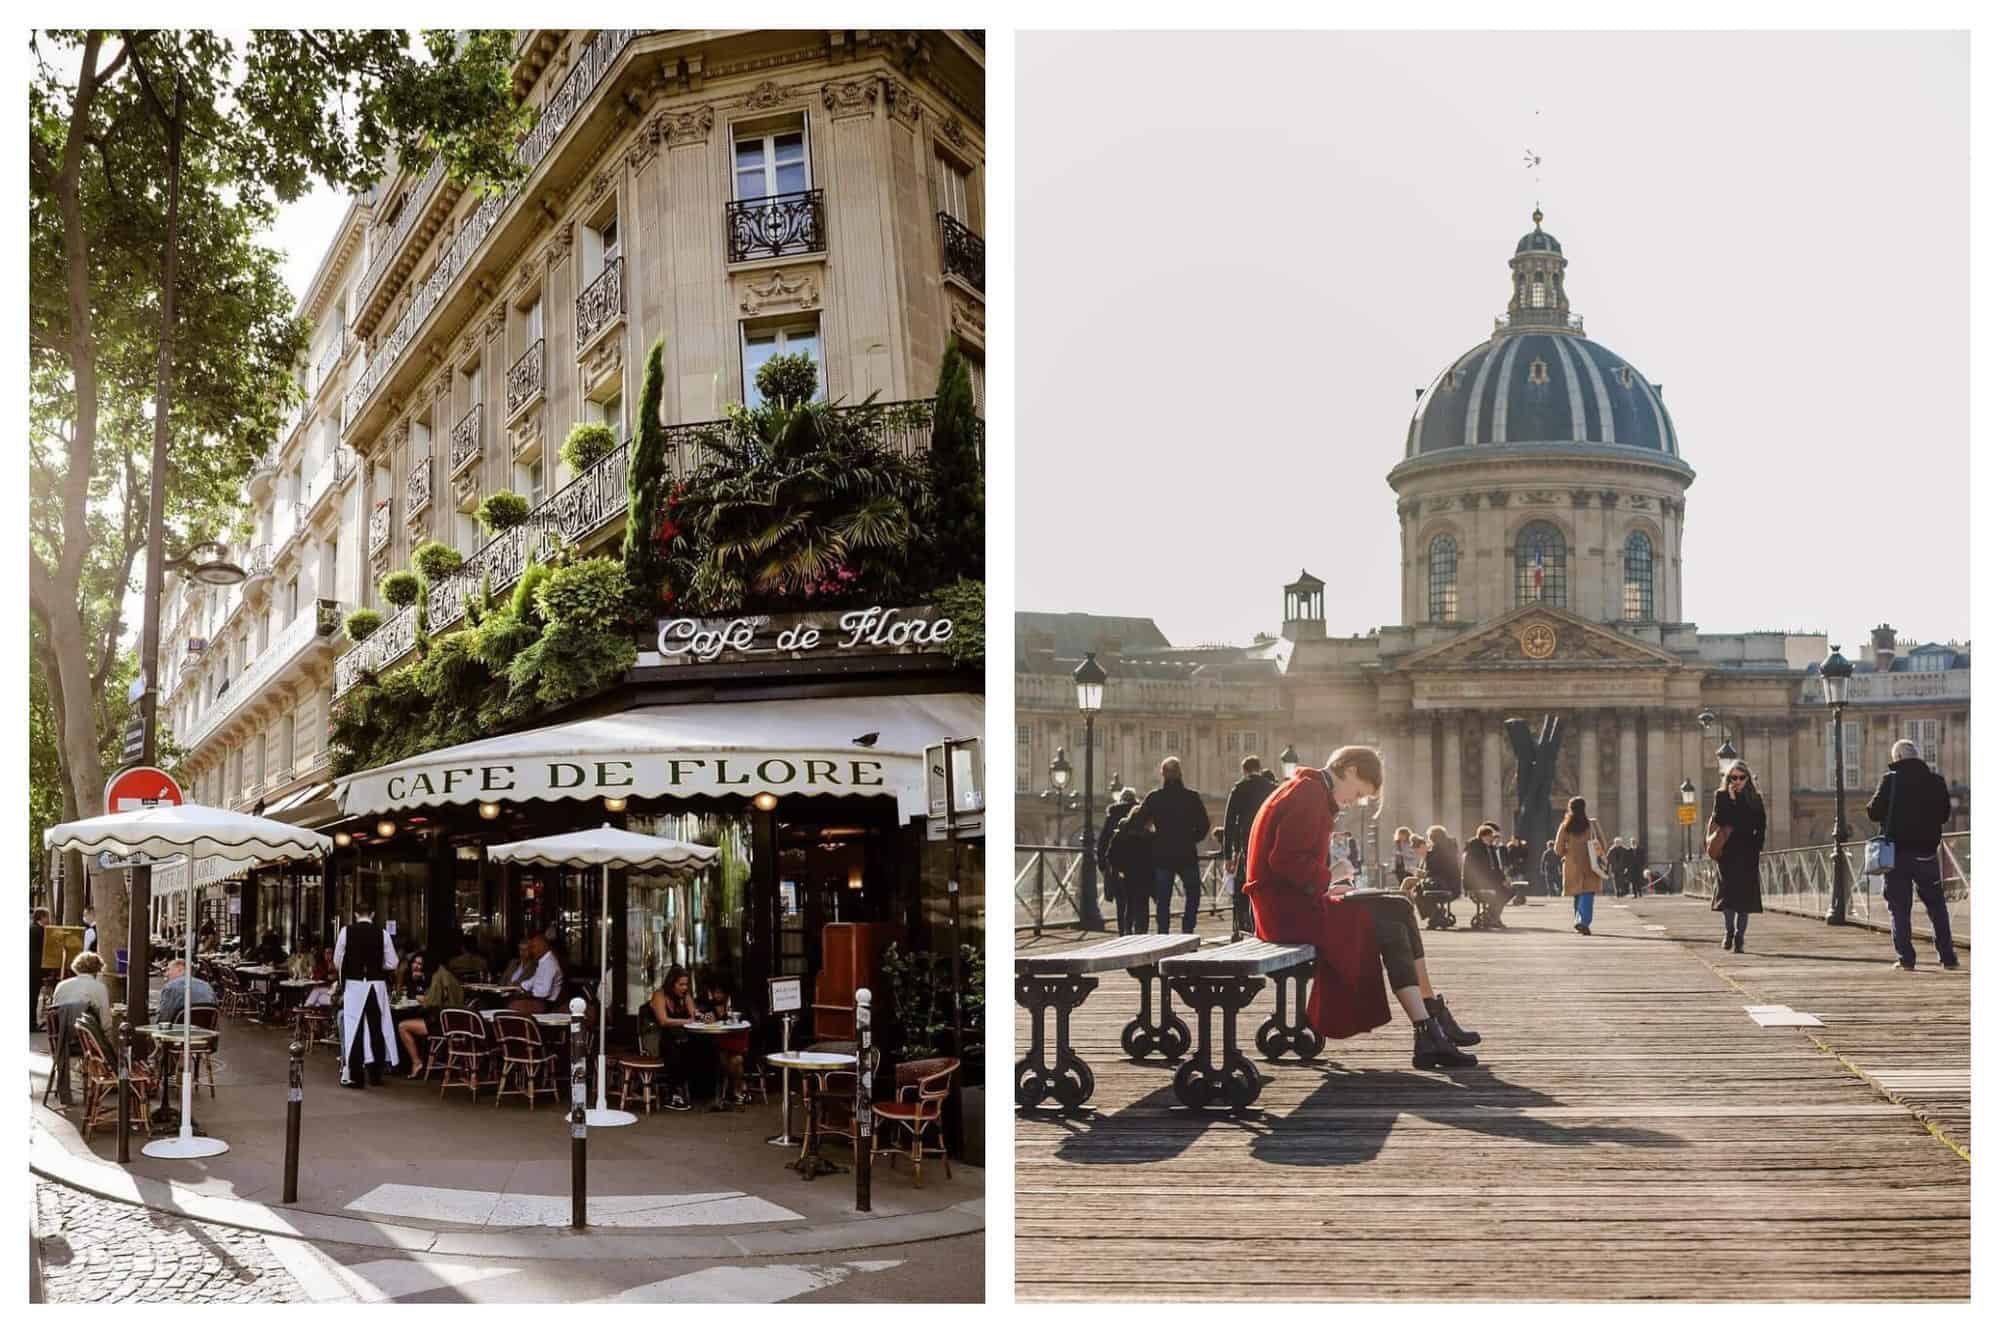 On the left is the famous Parisian corner coffeehouse Café de Flore with its green shrubs and white parasols. On the right is a lady in a red coat sitting on a bench on the wooden Pont des Arts bridge with the Palace of the Institute of France at the end of it.